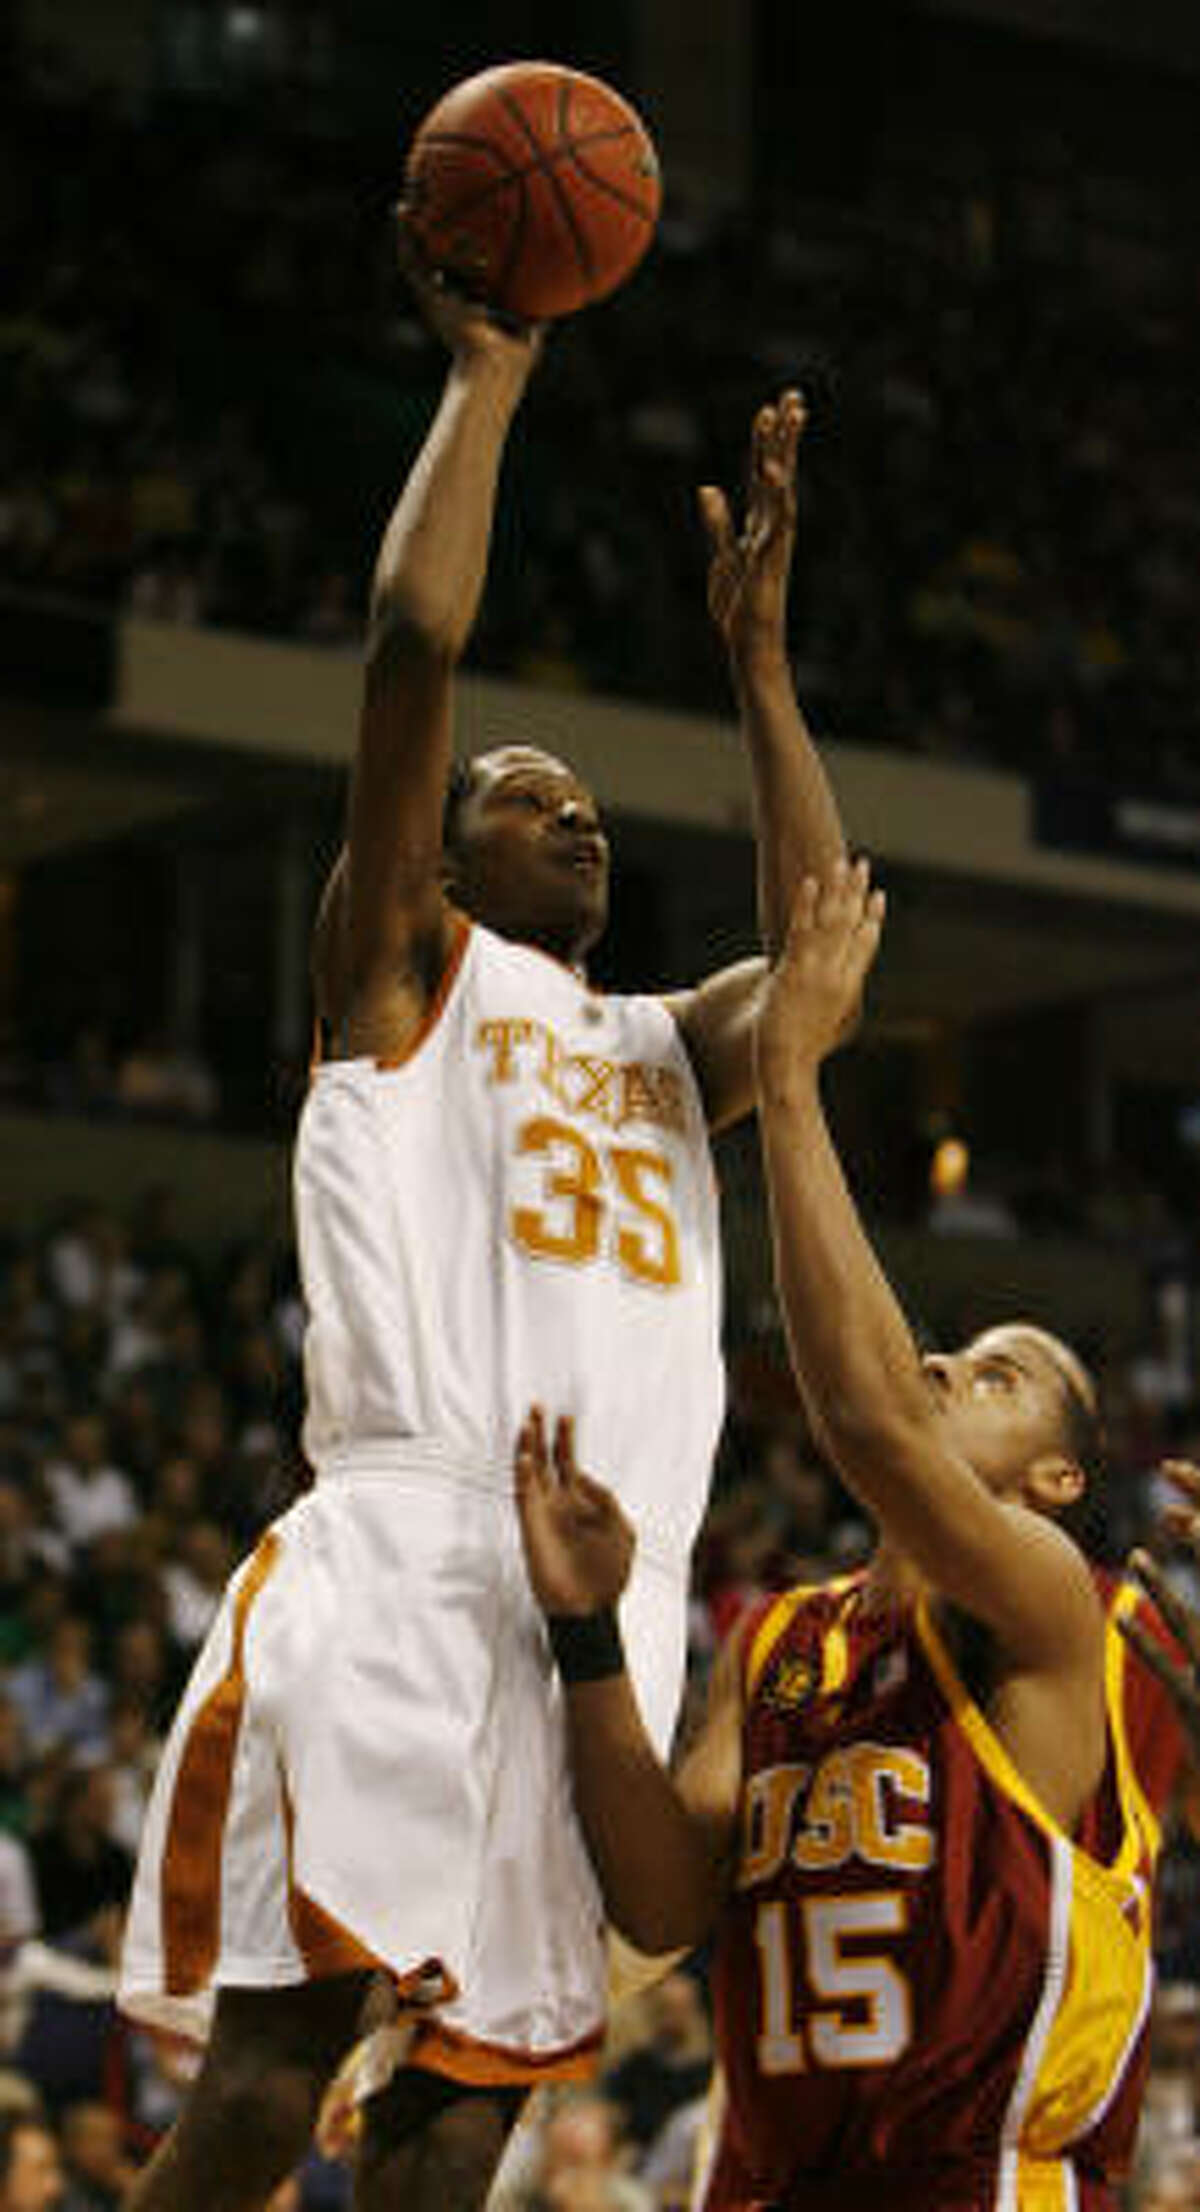 Texas' Kevin Durant (35) goes up over USC's Dwight Lewis in the first half of Sunday's East Regional game at Spokane, Wash. Durant scored 30 points and had nine rebounds, but it wasn't enough as the fifth-seeded Trojans breezed past the No. 4 Longhorns 87-68.